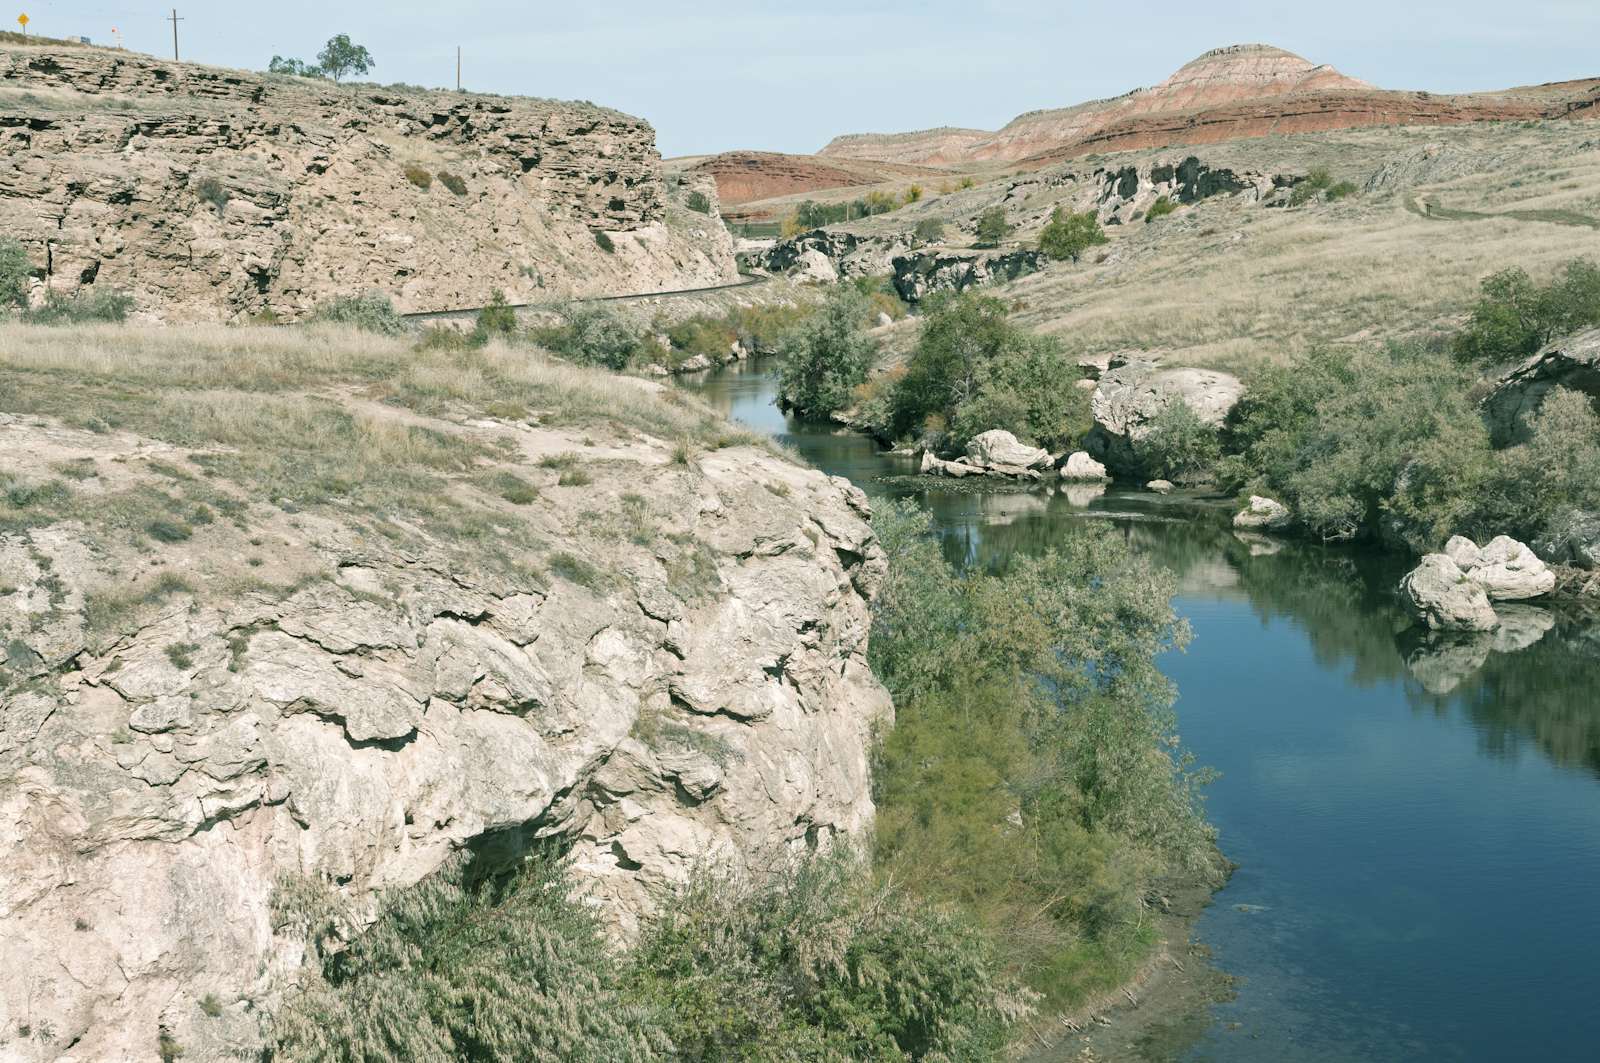 Railroad track follows course of Bighorn River in central Wyoming